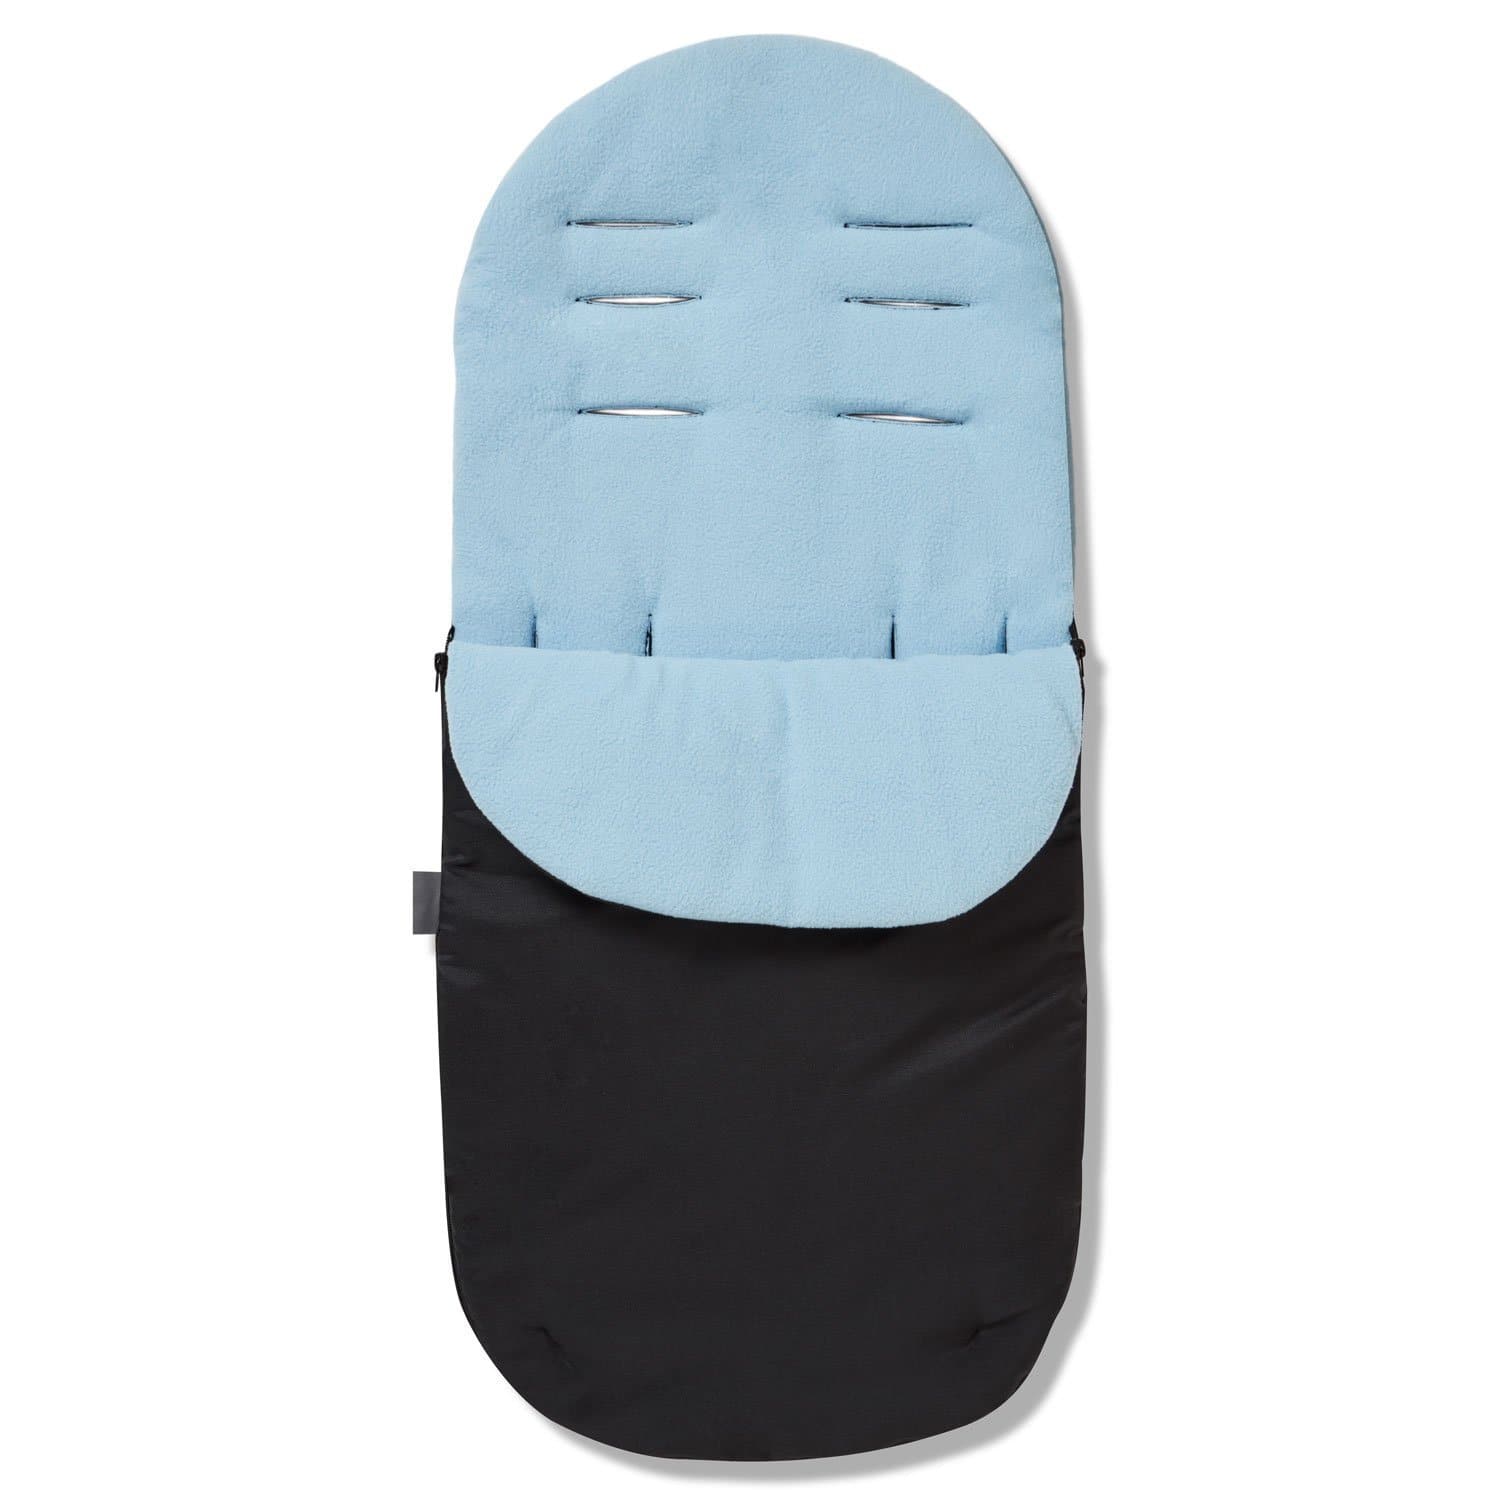 Footmuff / Cosy Toes Compatible with BabyCare - Light Blue / Fits All Models | For Your Little One